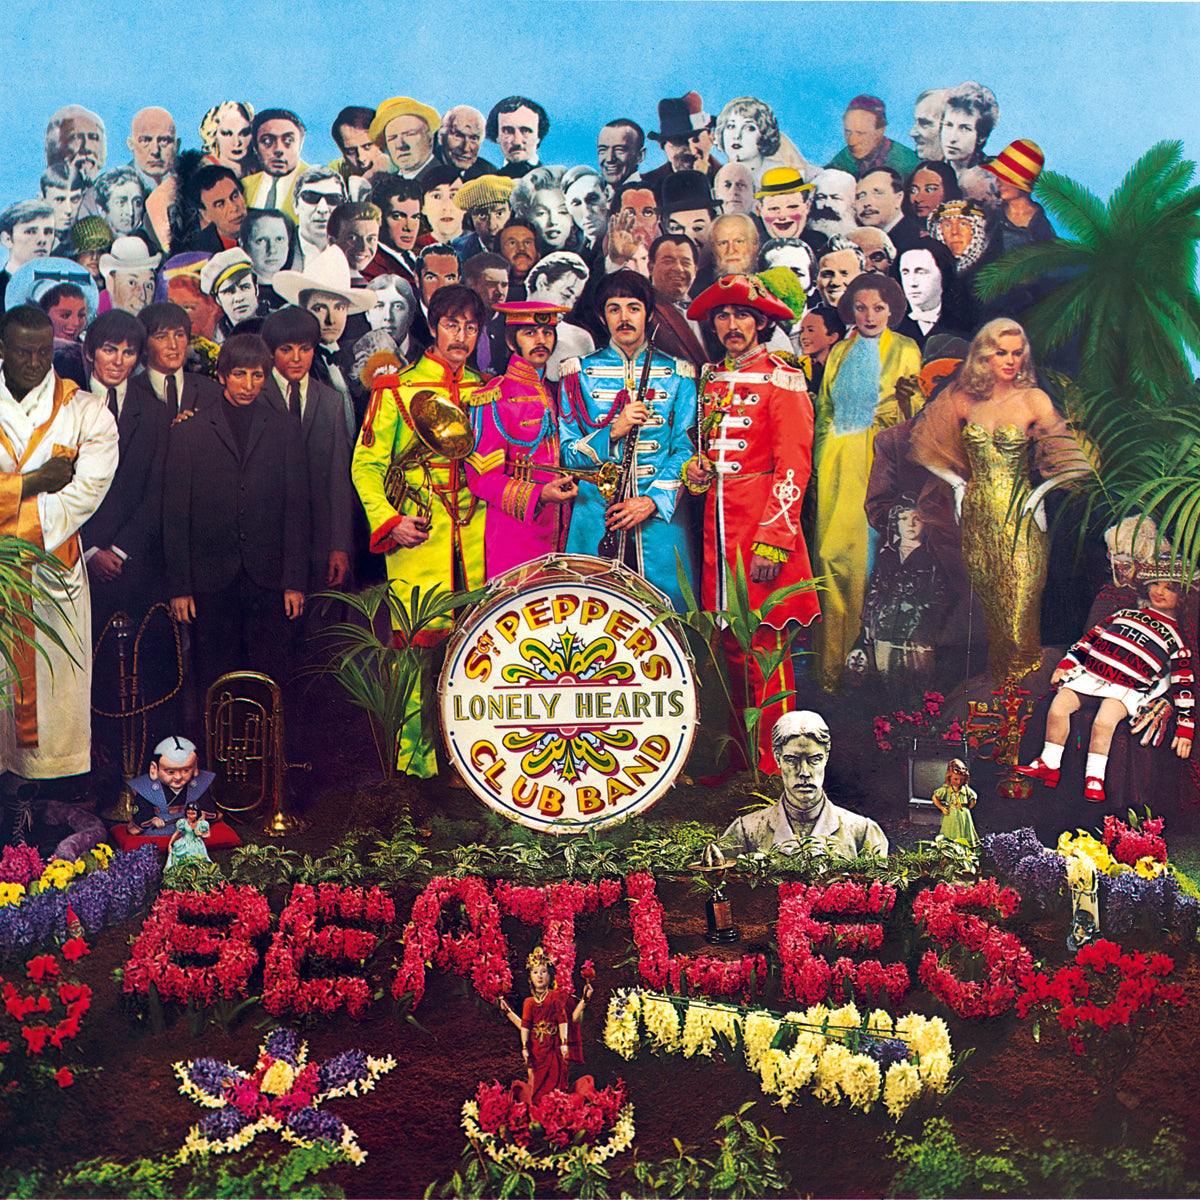 THE BEATLES - Sgt.Pepper's Lonely Hearts Club Band (50th Anniversary Edition) - LP - 180g Vinyl